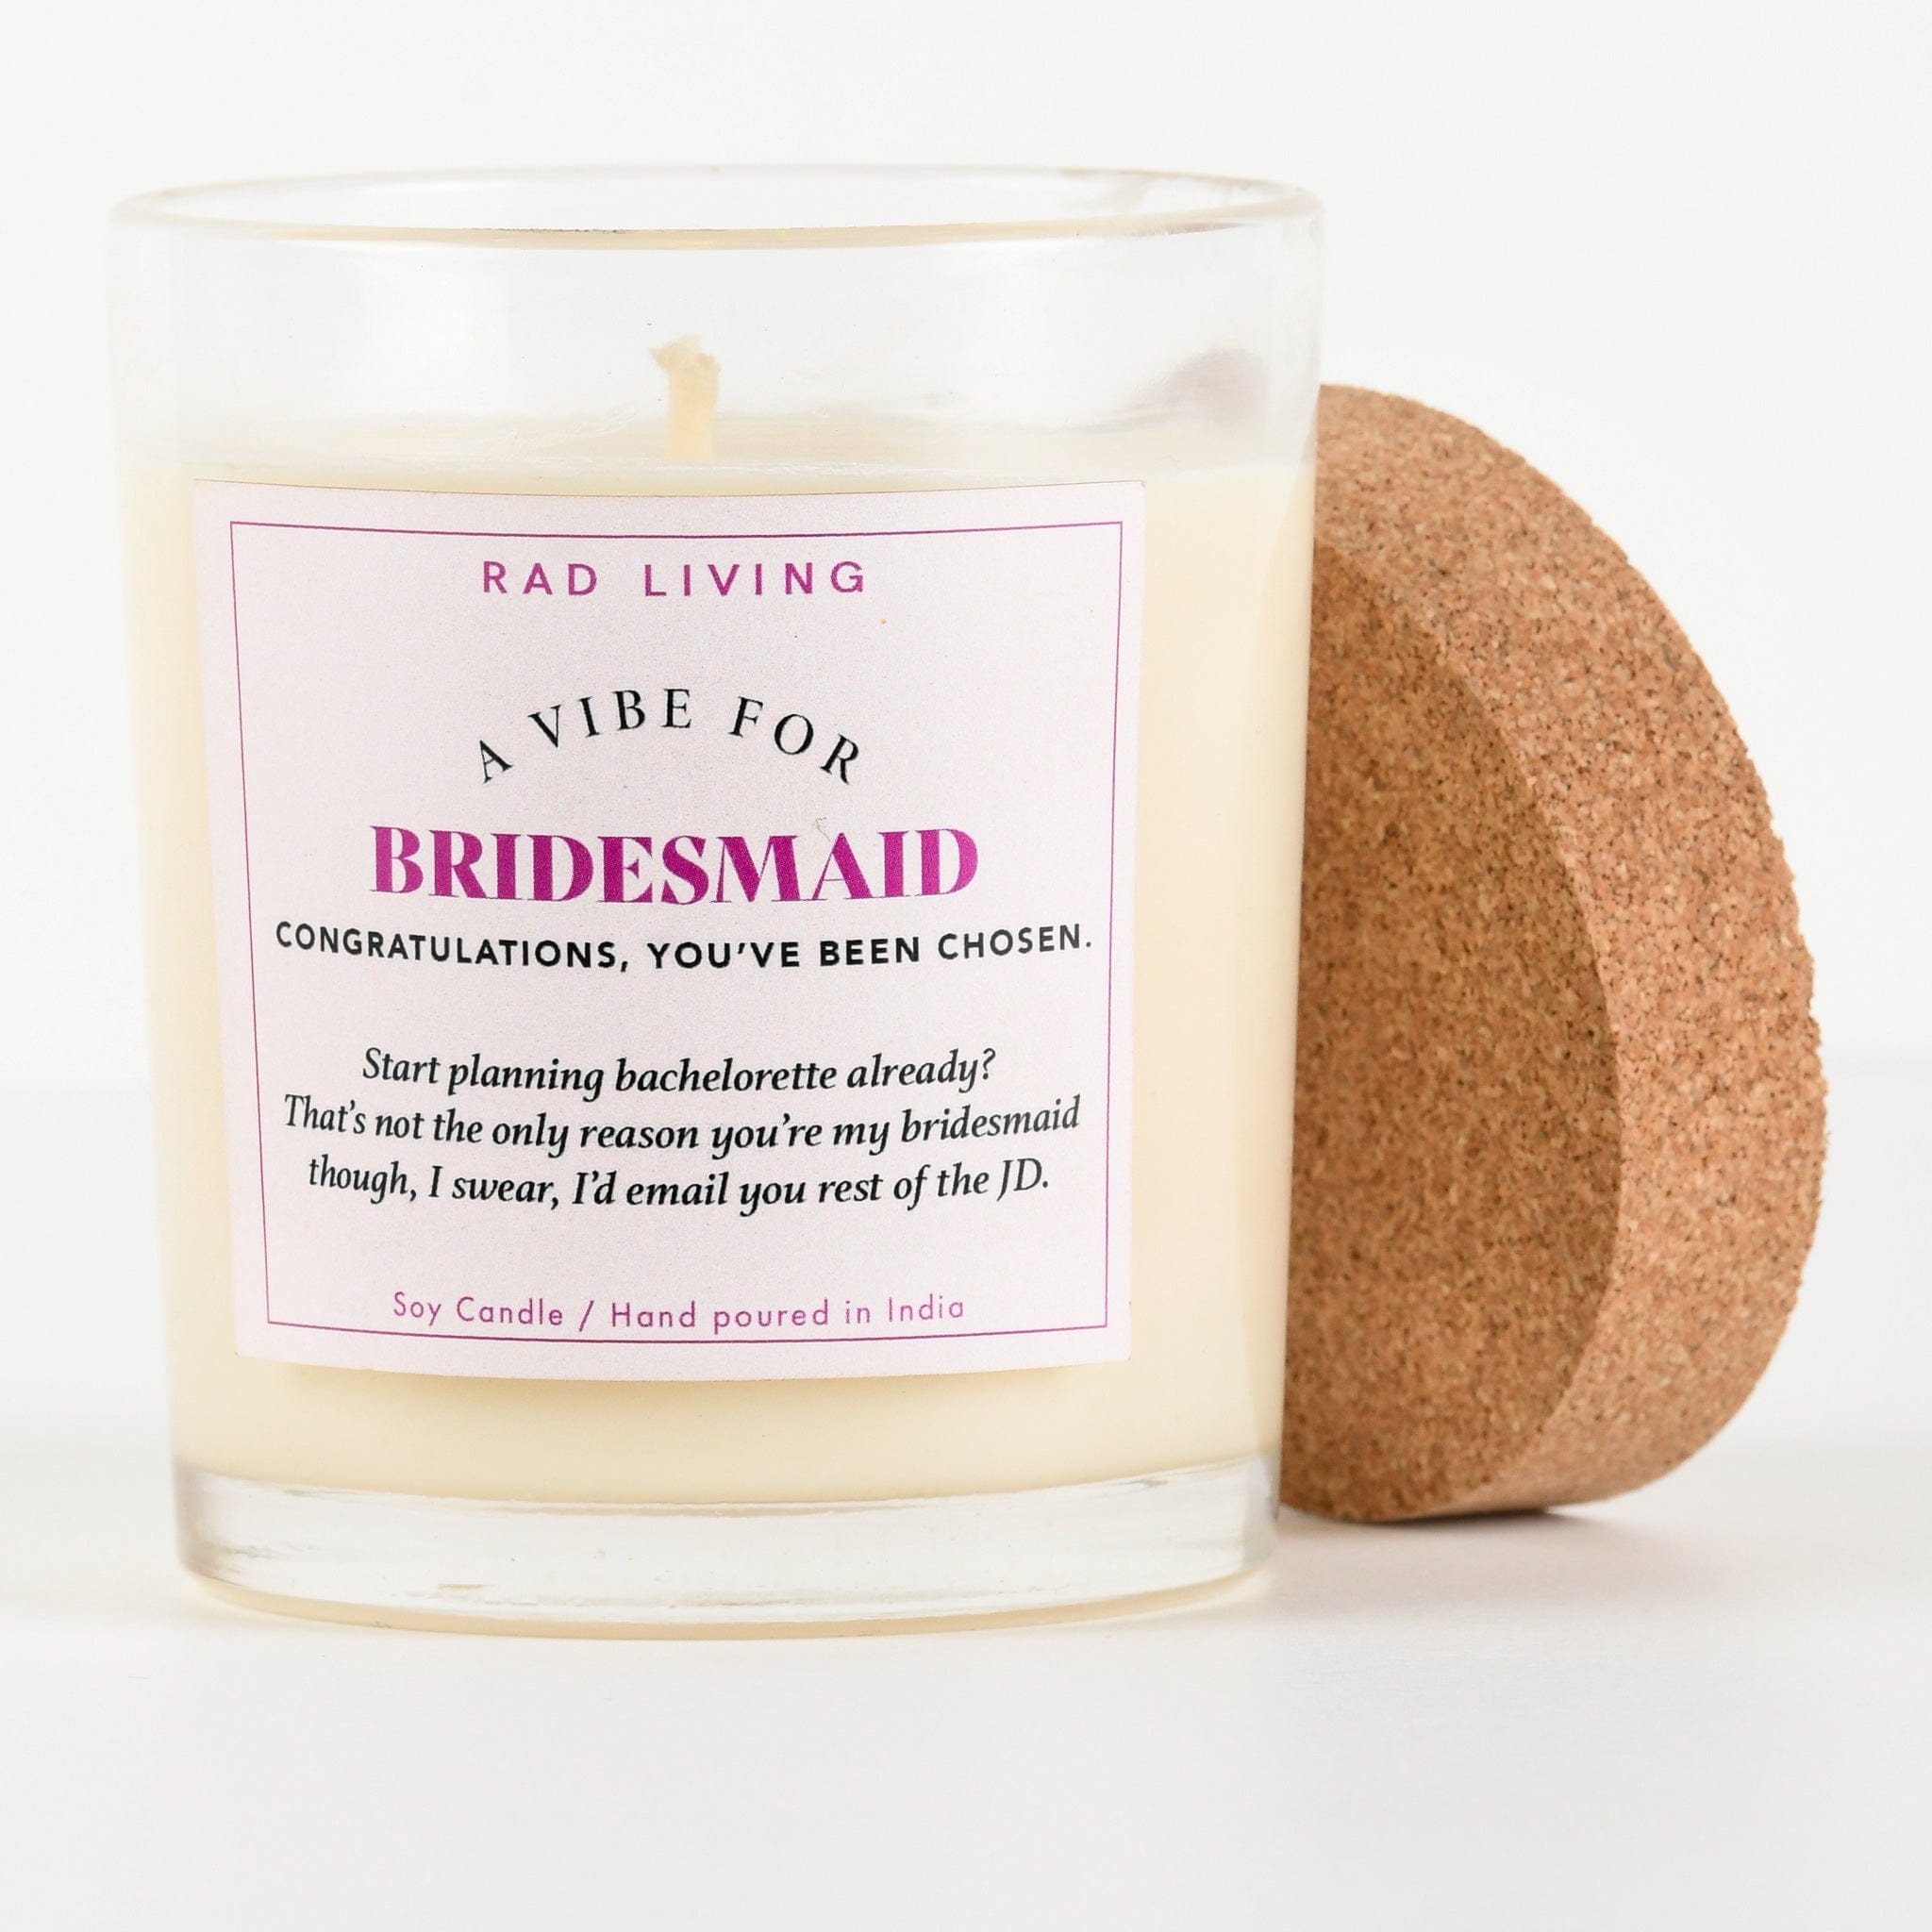 Bridesmaid - Peach Mimosa Scented Candle